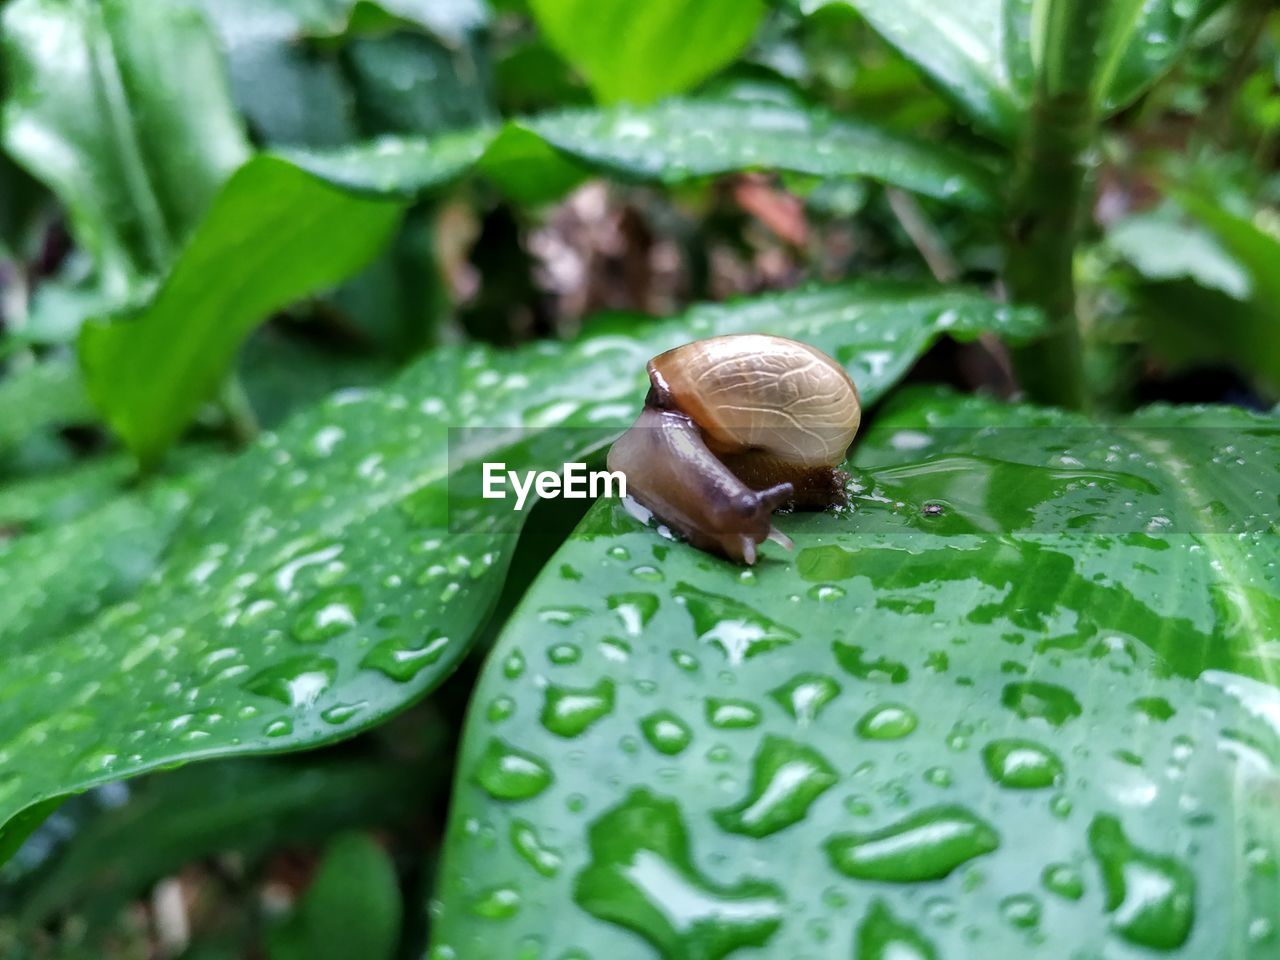 Close-up of snail on wet plant leaf